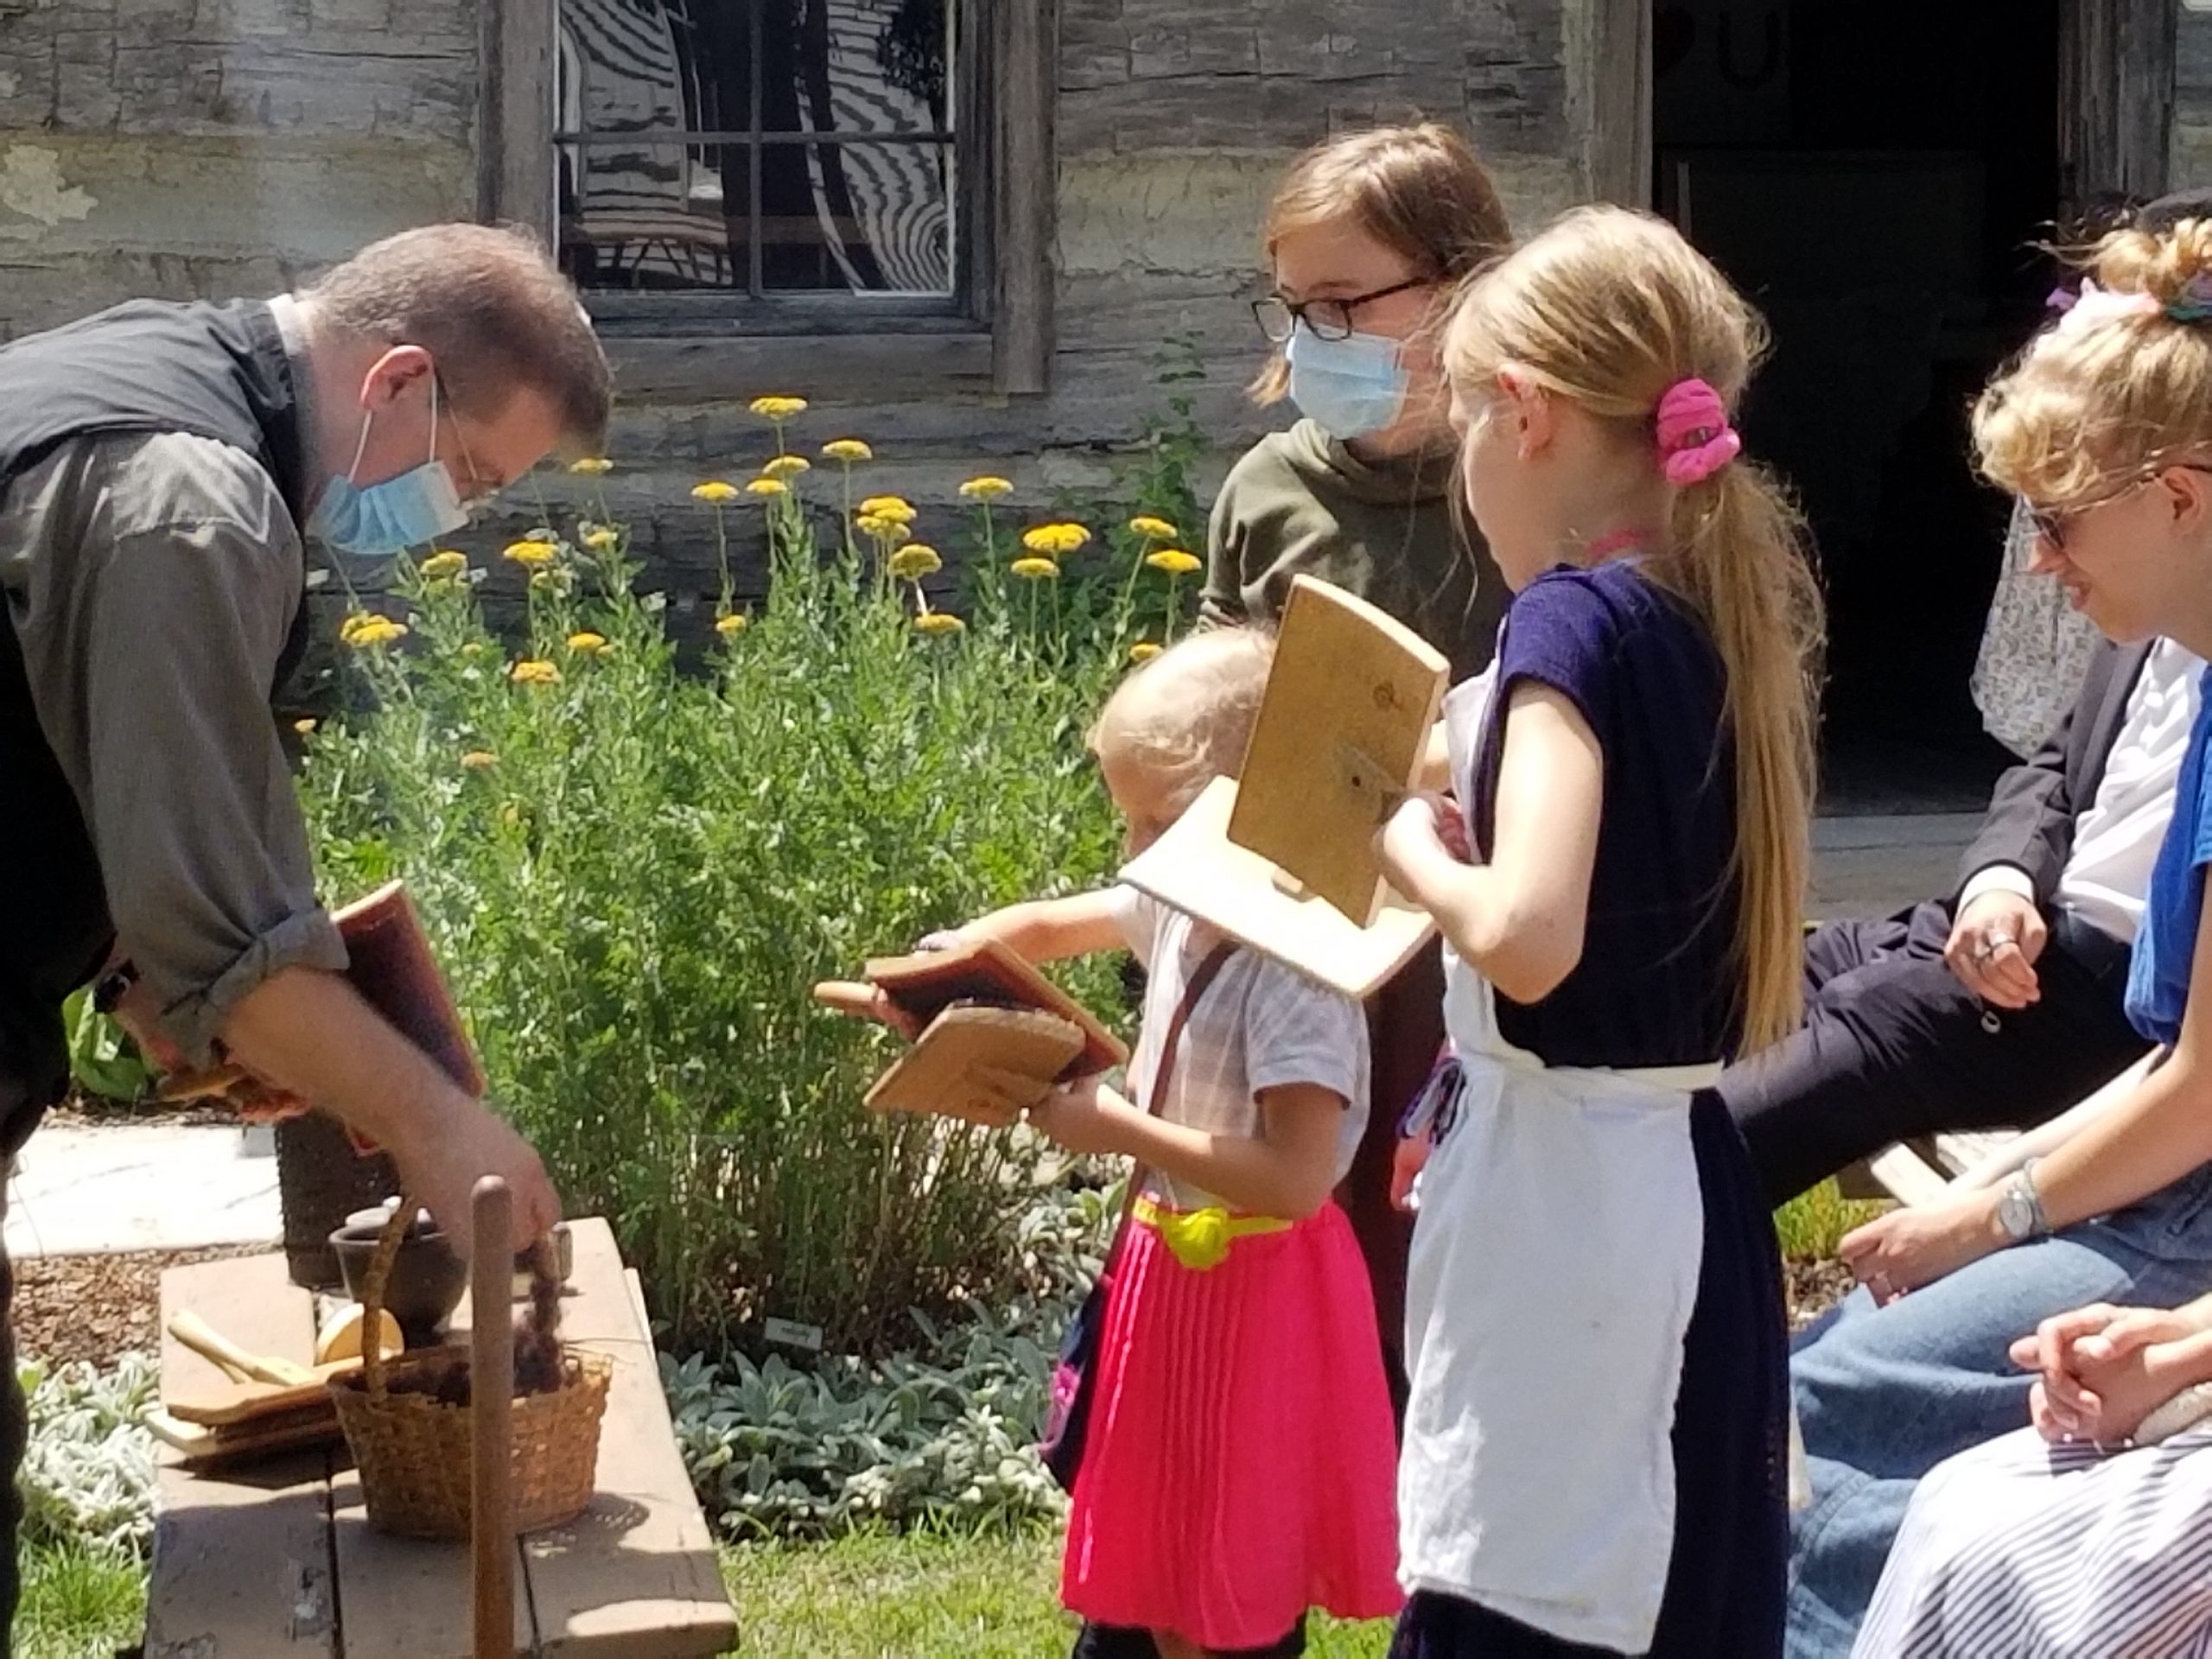 Hands-On History Programs for Families and Small Groups - Pioneer Kids Chores